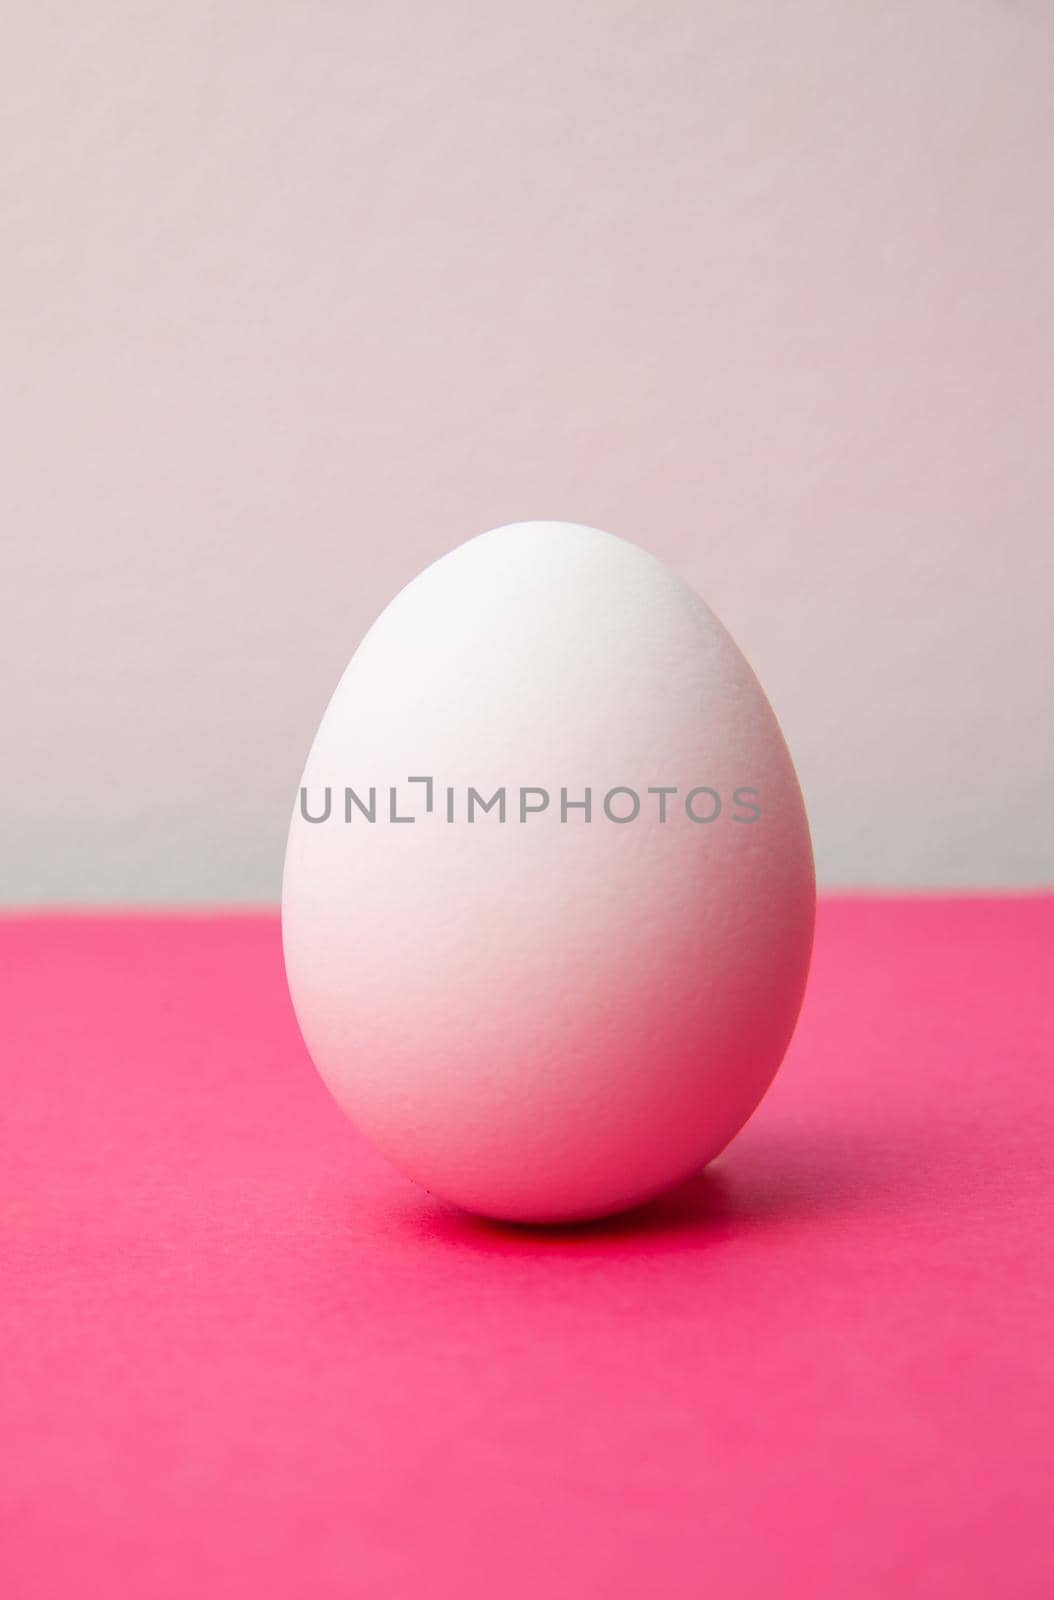 Single white oval whole chicken egg placed on bright pink background in studio